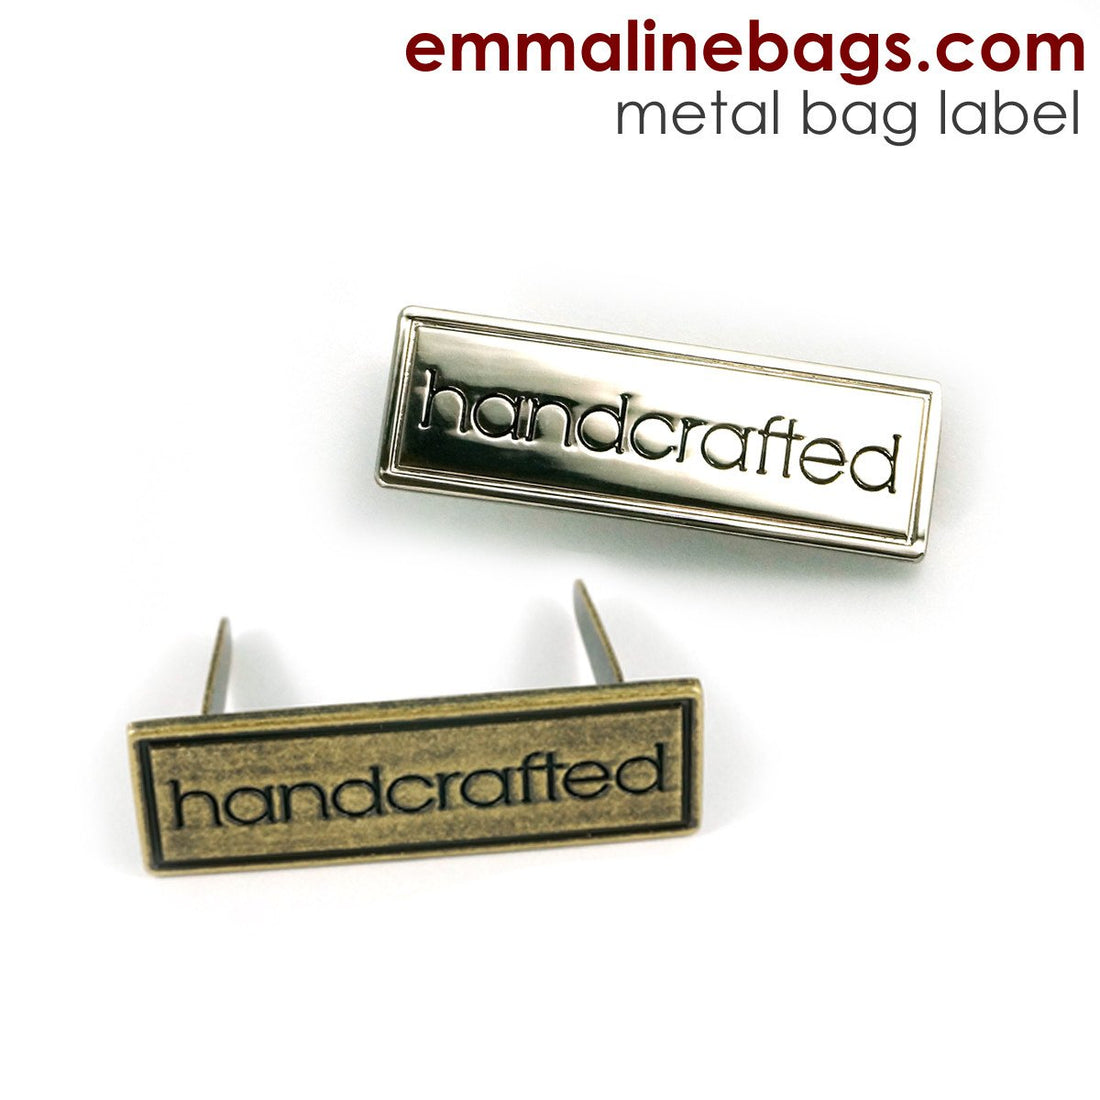 Metal Bag Label: &quot;HANDCRAFTED&quot; With Border